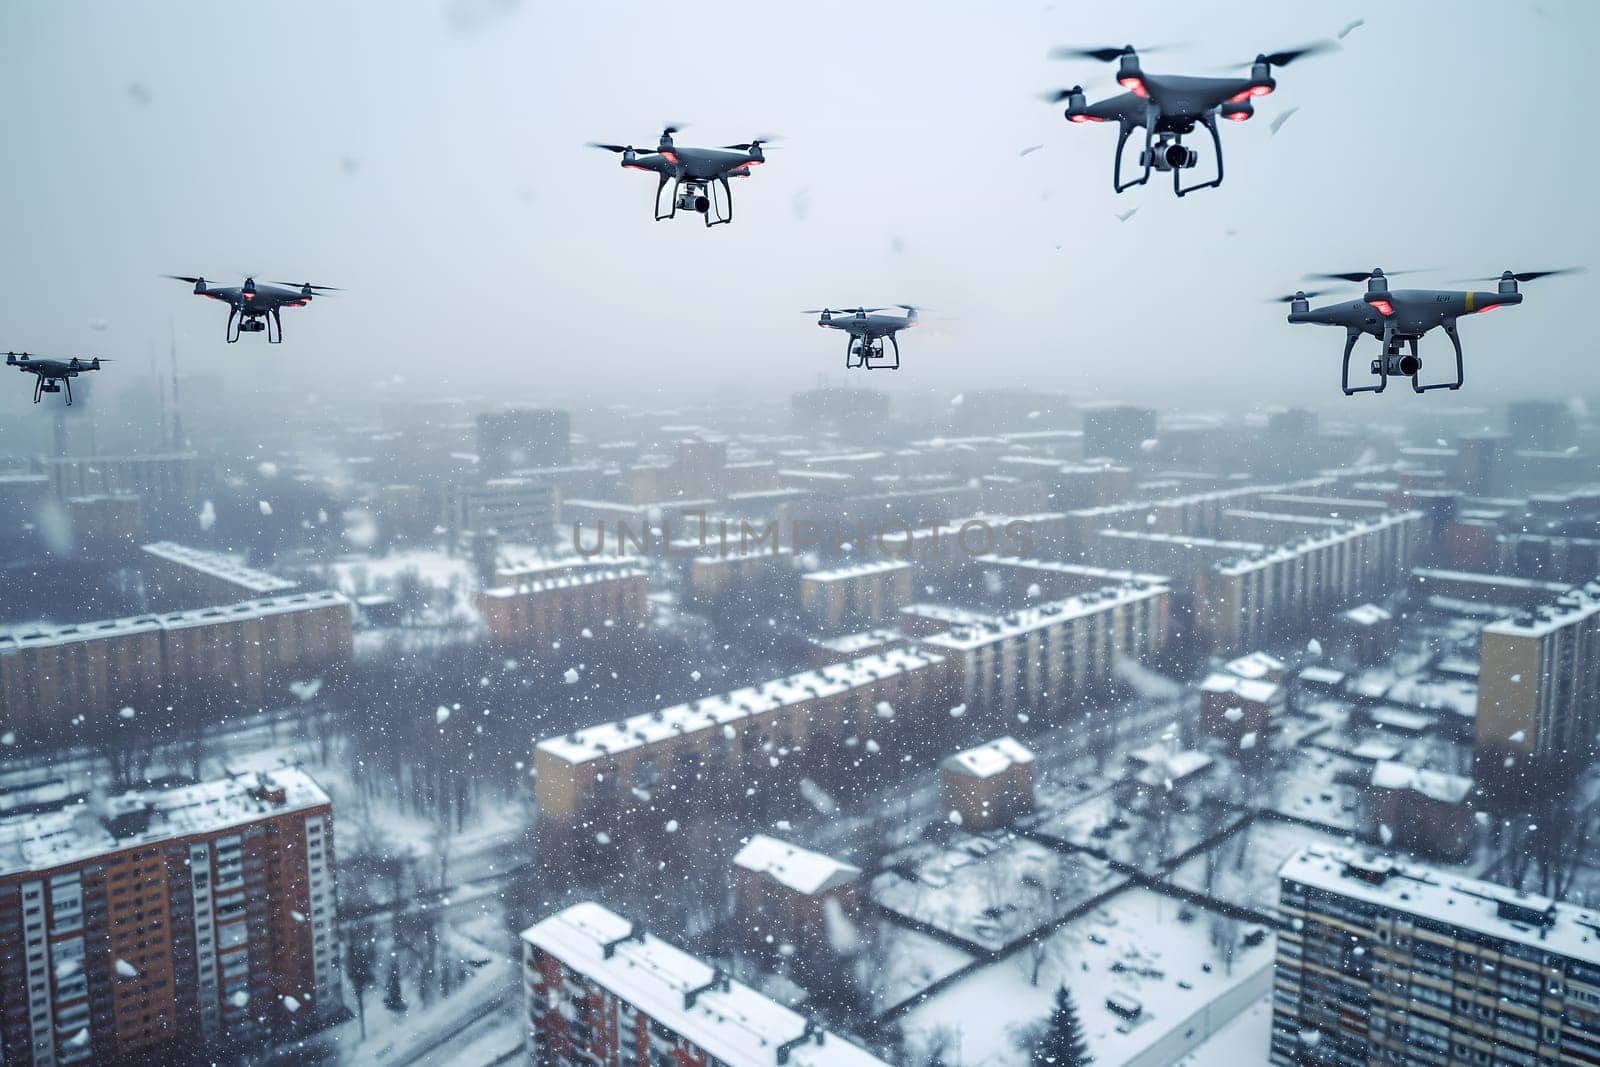 Group of drones over city at winter day or morning. Neural network generated image. Not based on any actual scene or pattern.